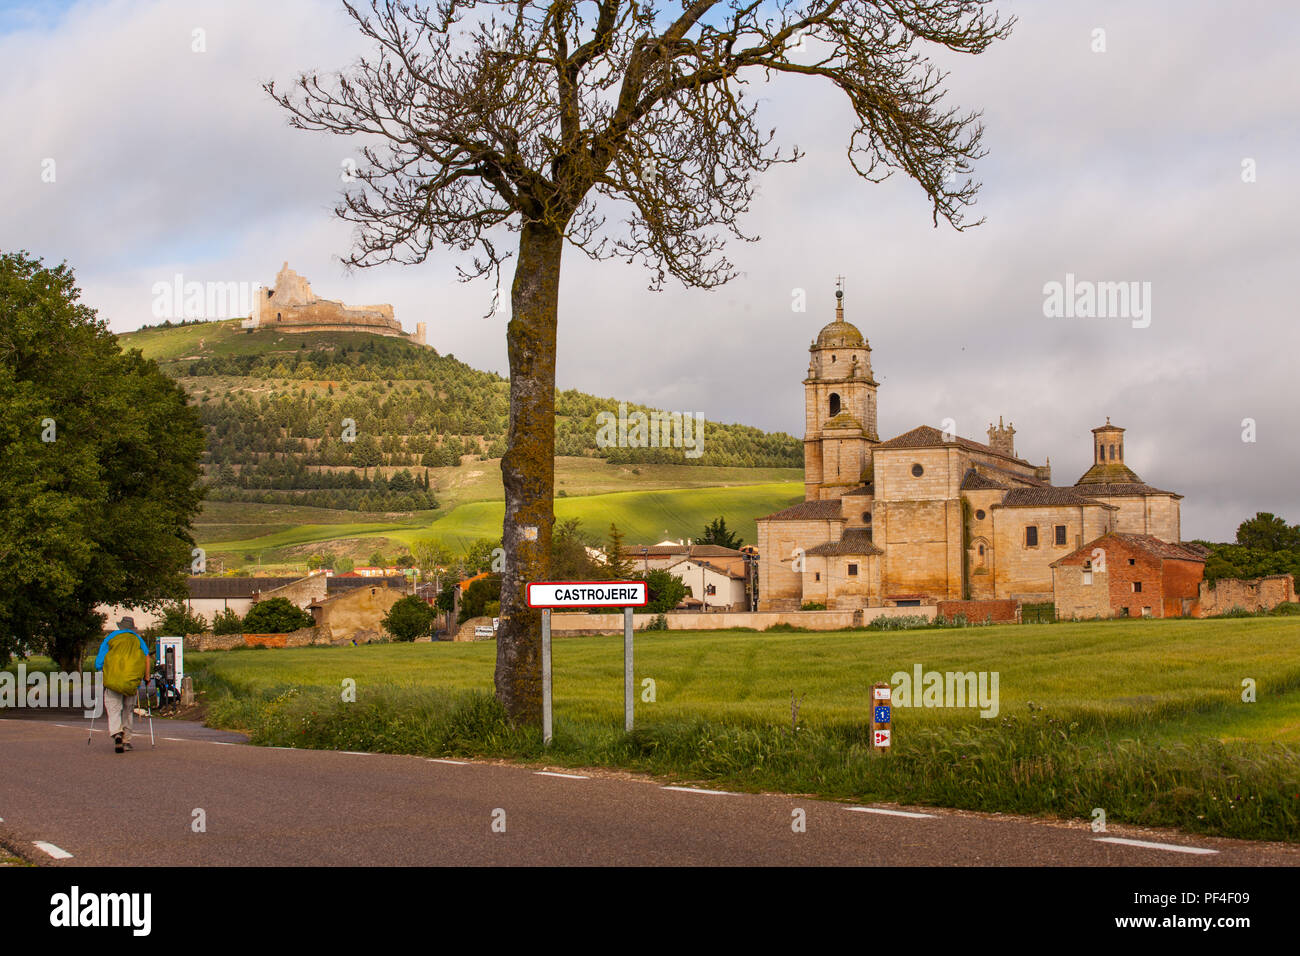 Pilgrims men and women approaching the Spanish town of Castrojeriz with its Templar Castle while walking the Camino de Santiago pilgrimage route Spain Stock Photo